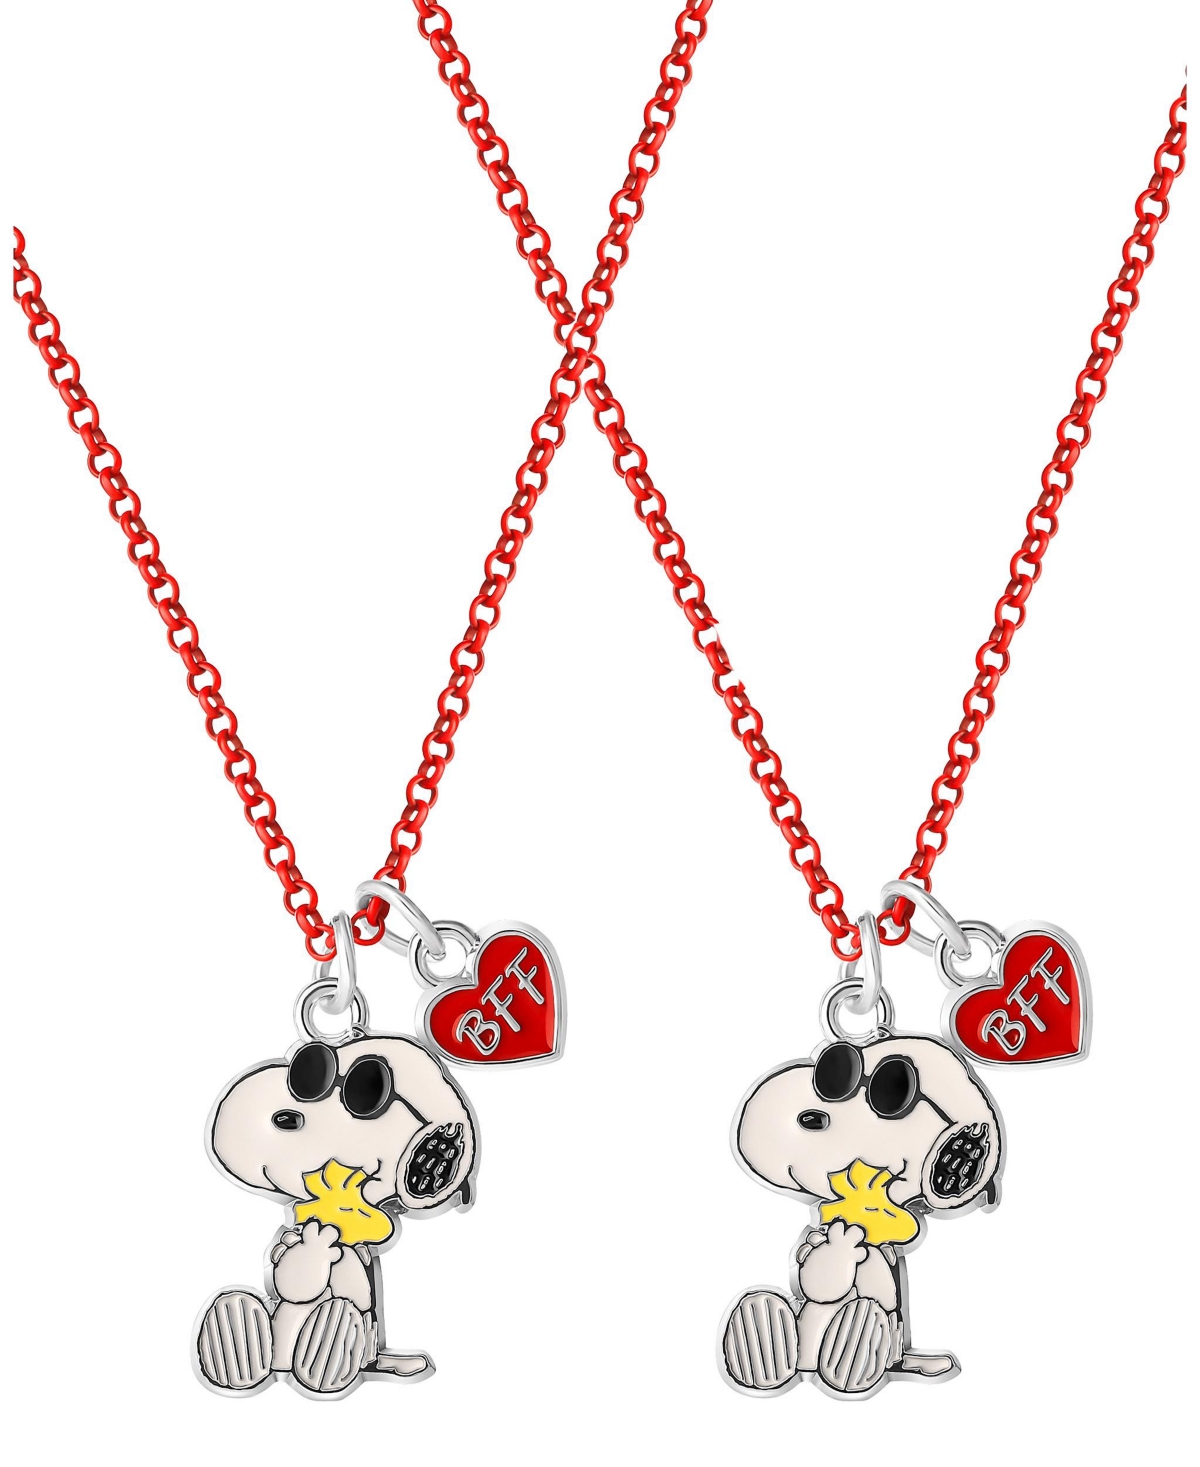 Snoopy and Woodstock Bff Fashion 2 Pc Necklace Set - Red, white, yellow